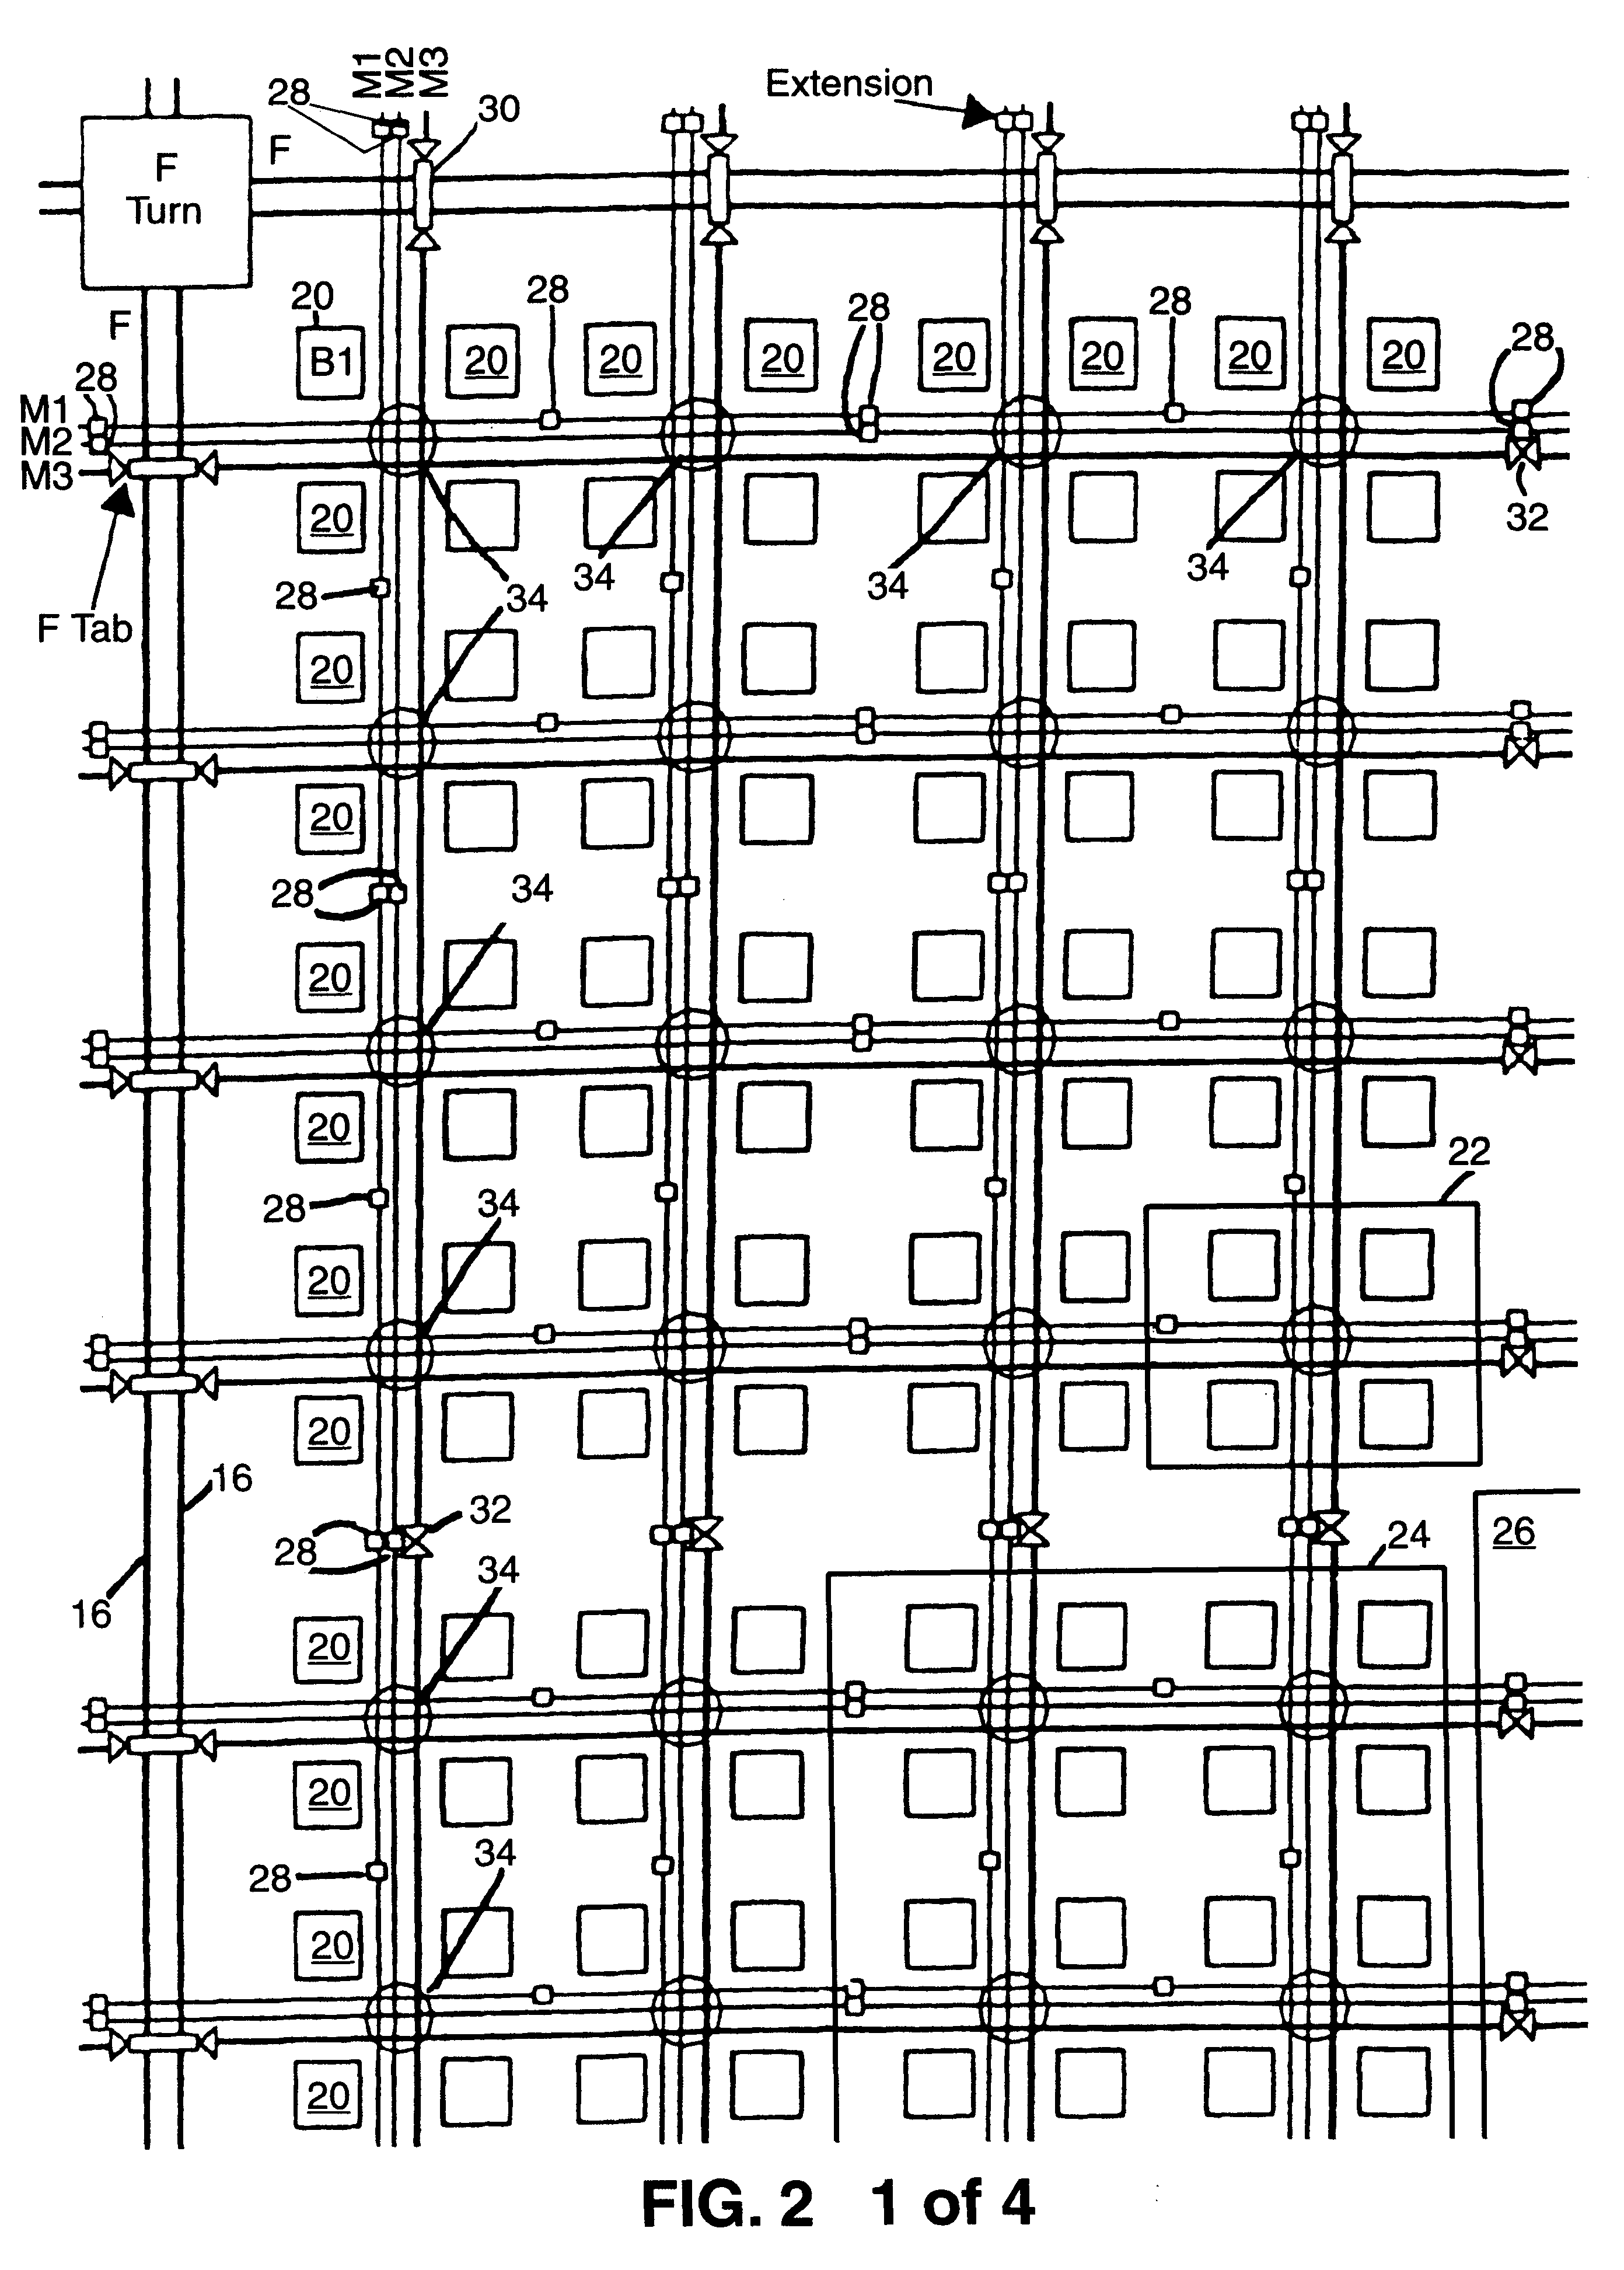 Block level routing architecture in a field programmable gate array